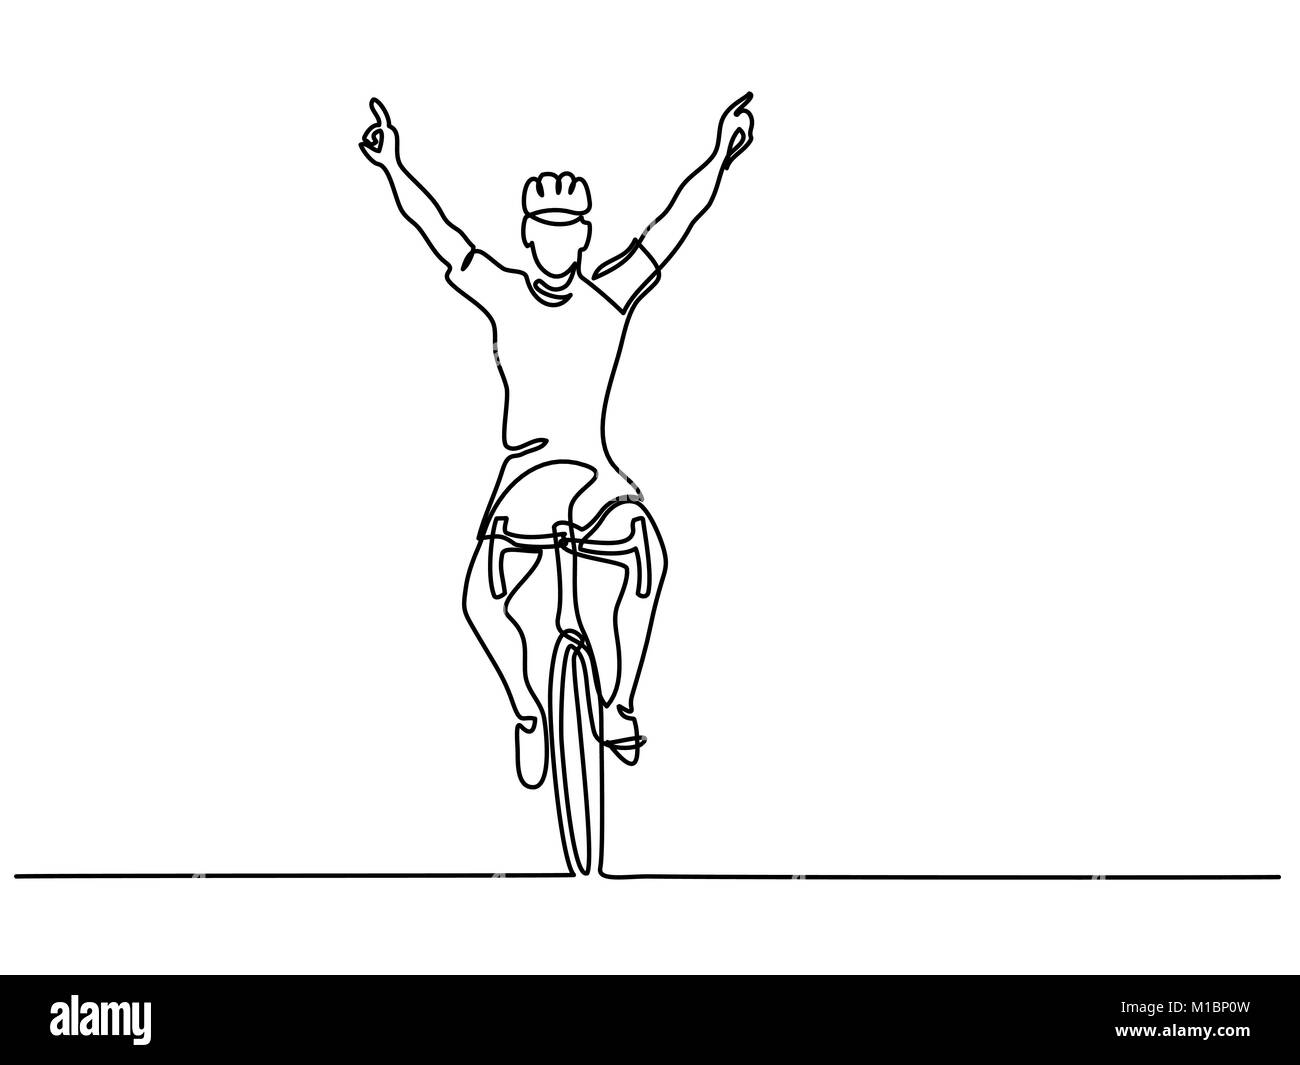 Man cyclist winner in competition on bicycle Stock Vector